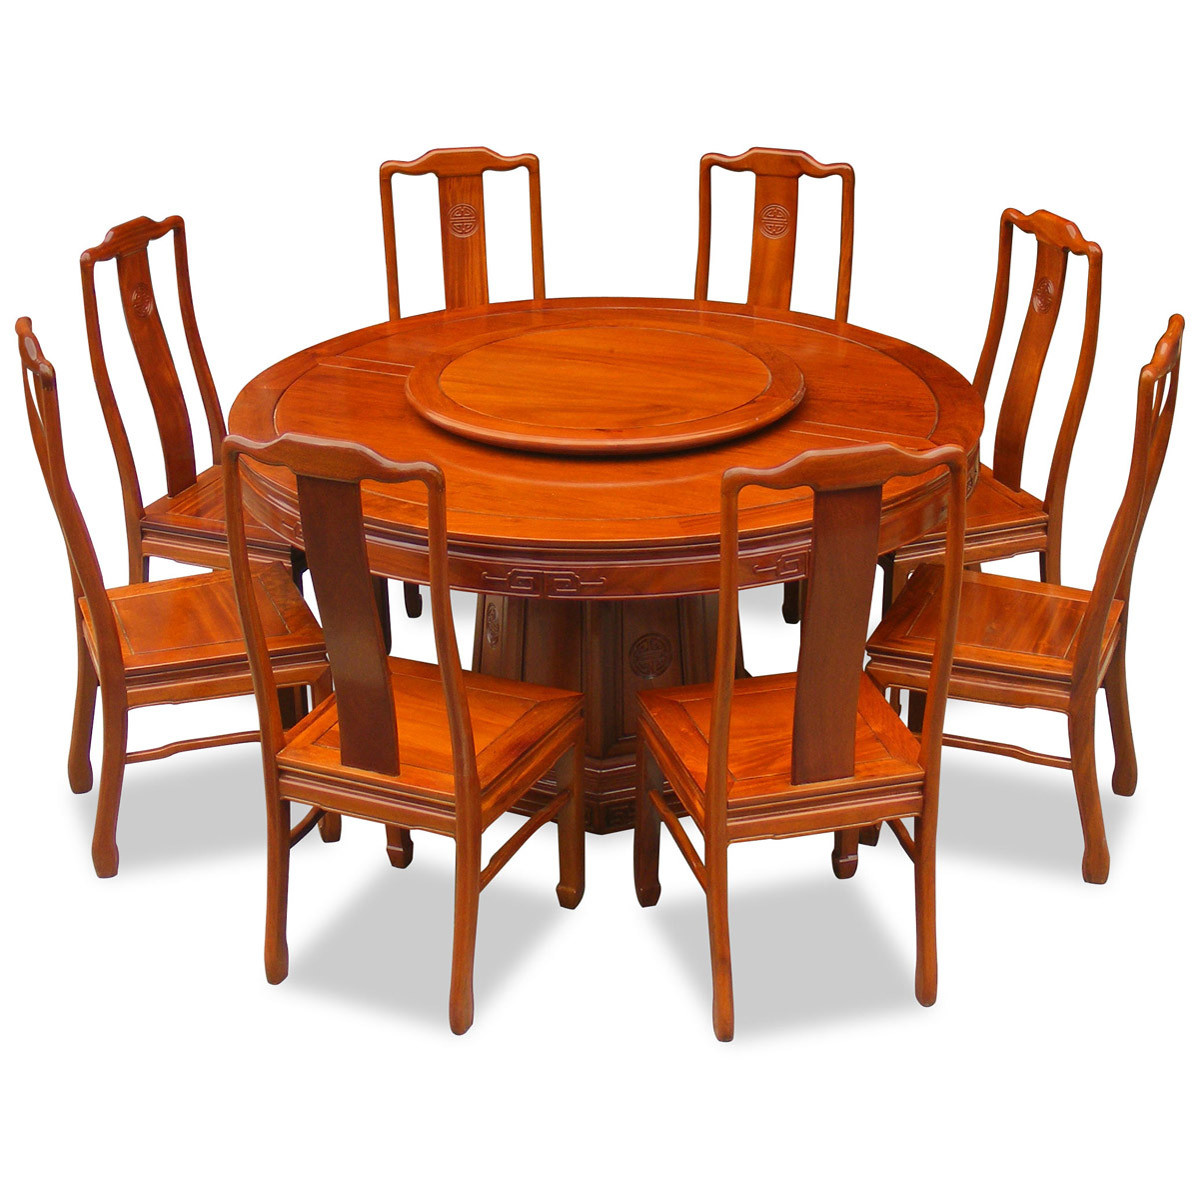 8 Chair Dinner Table
 60in Rosewood Longevity Design Round Dining Table with 8